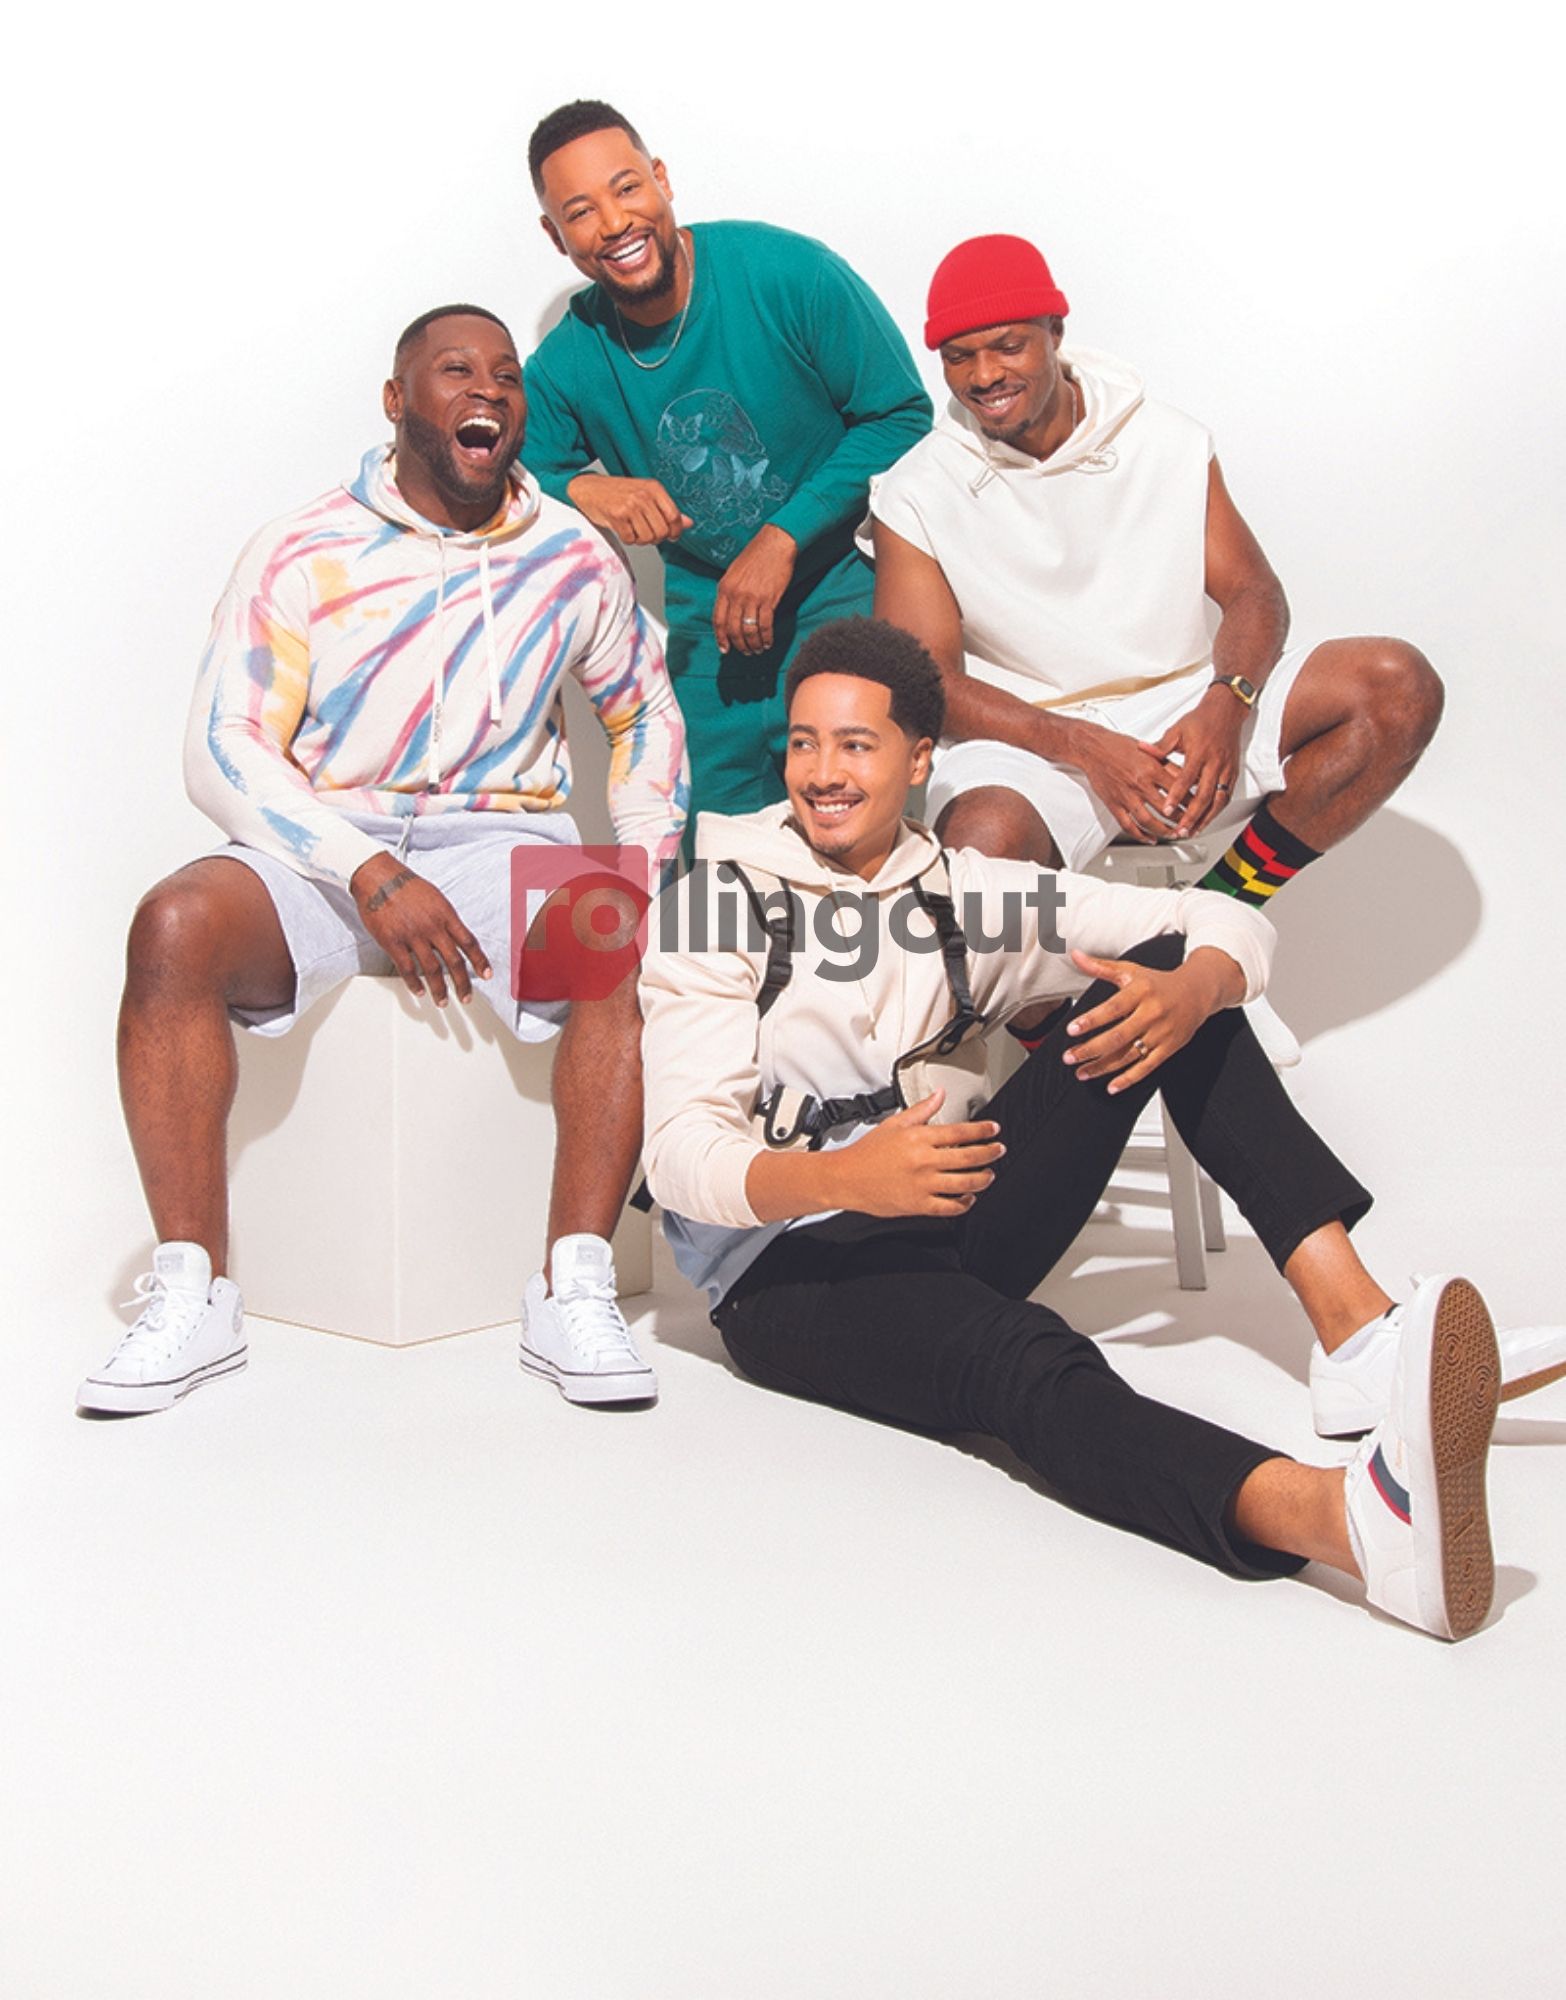 Celebrity men of 'Johnson' eager to impact culture of brotherhood on new series